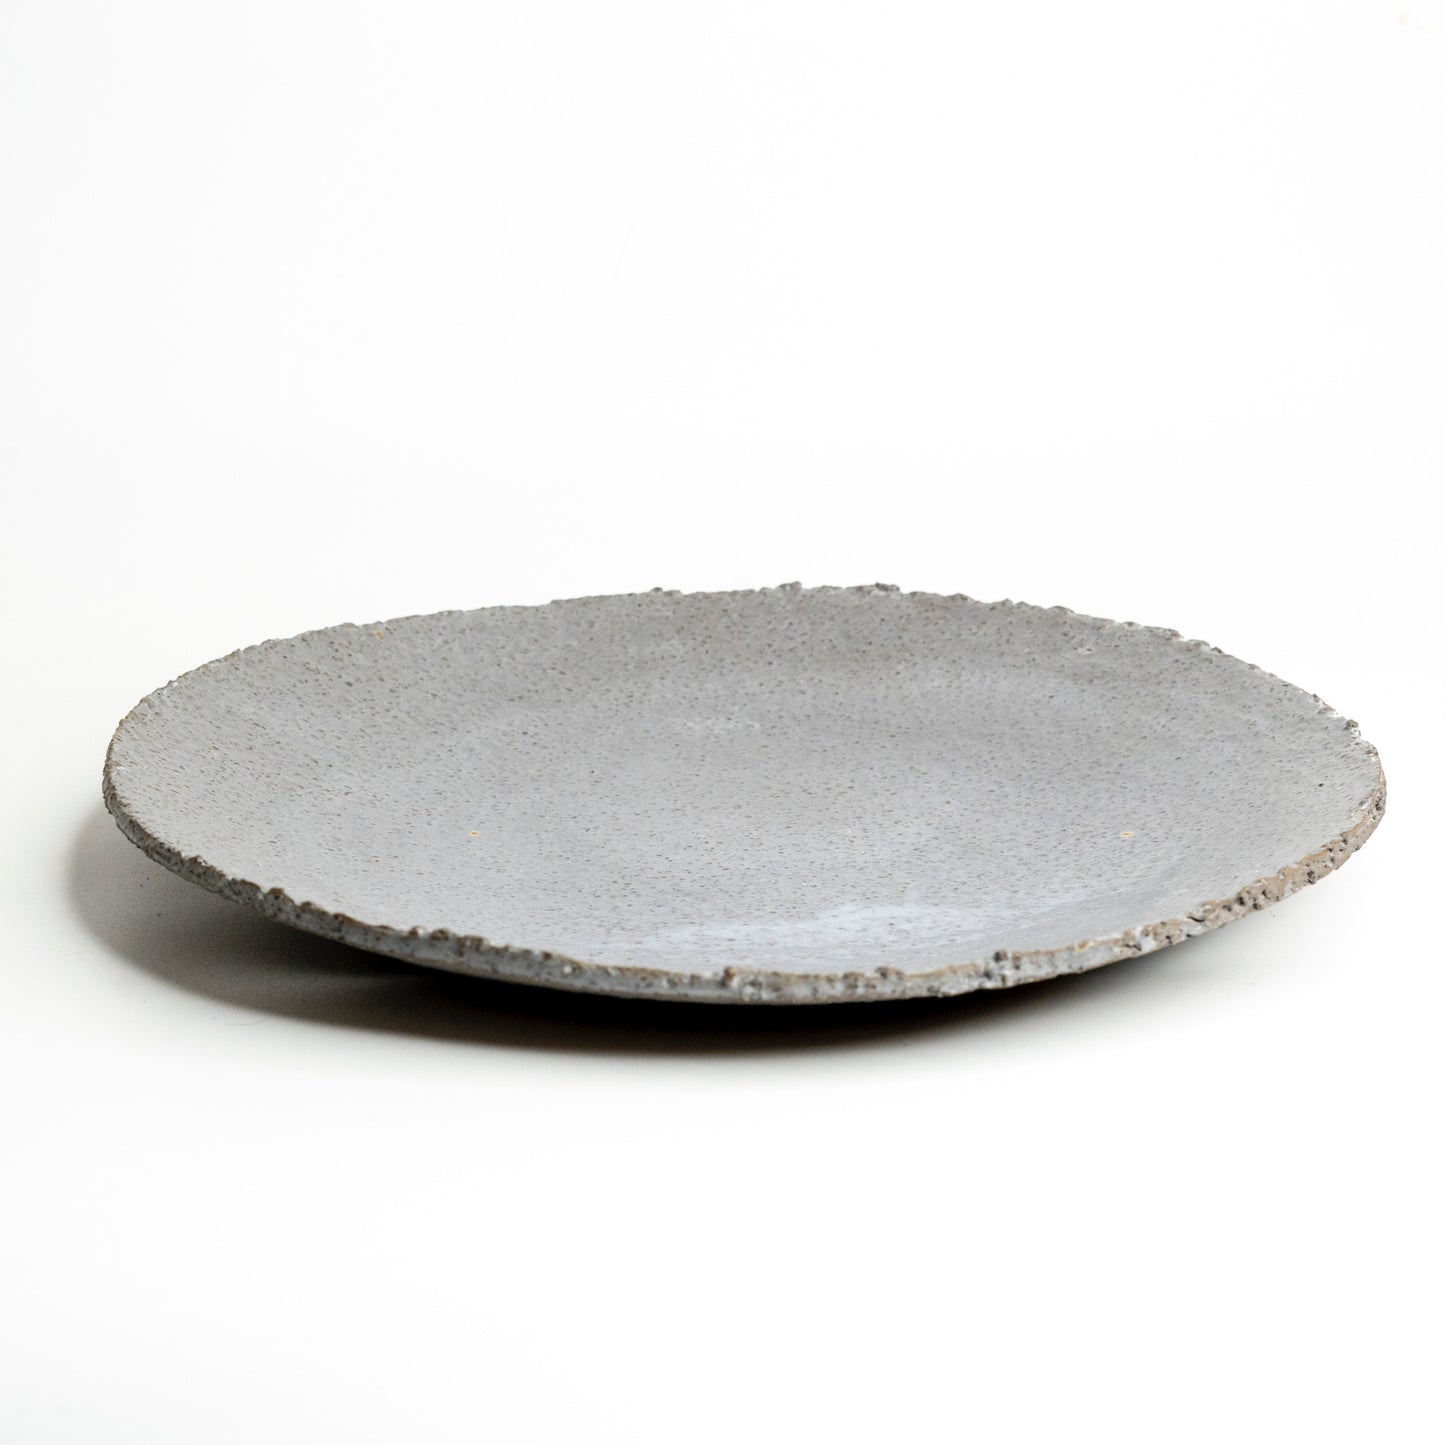 Large, textured plate